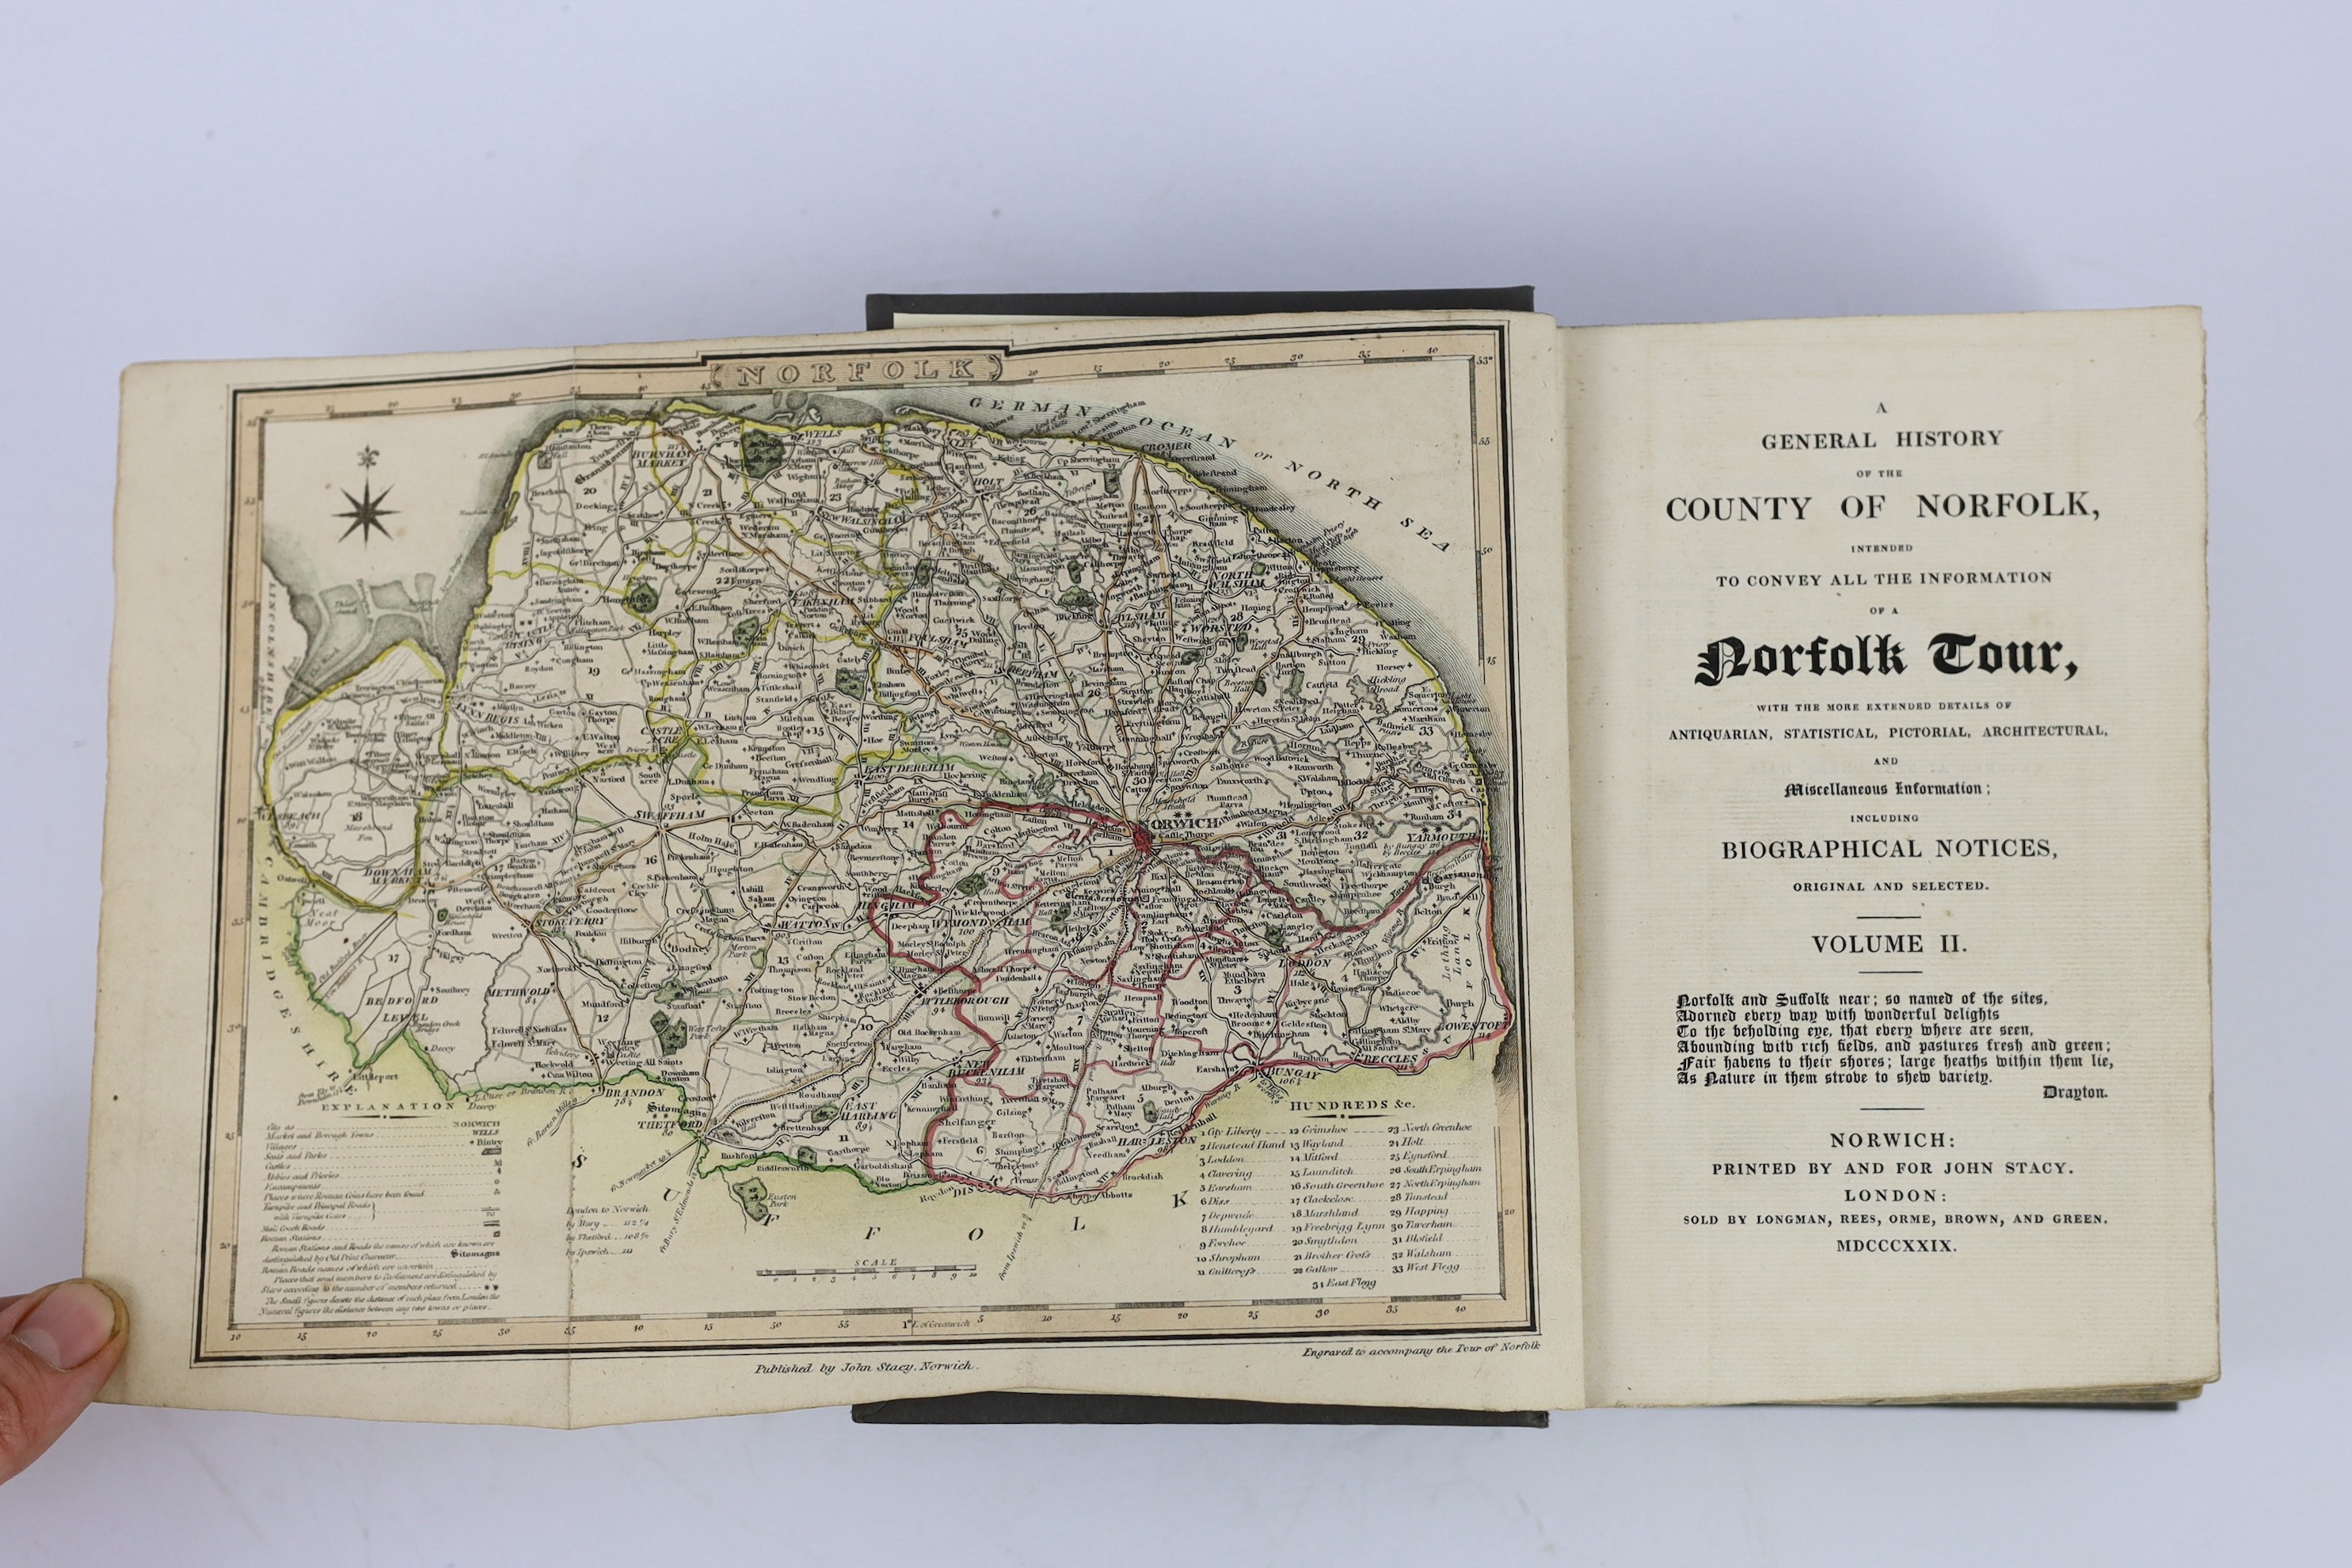 NORFOLK: A General History of the County of Norfolk, intended to convey all the information of a Norfolk Tour ... 2 vols, frontis and hand-coloured folded map, subscribers list